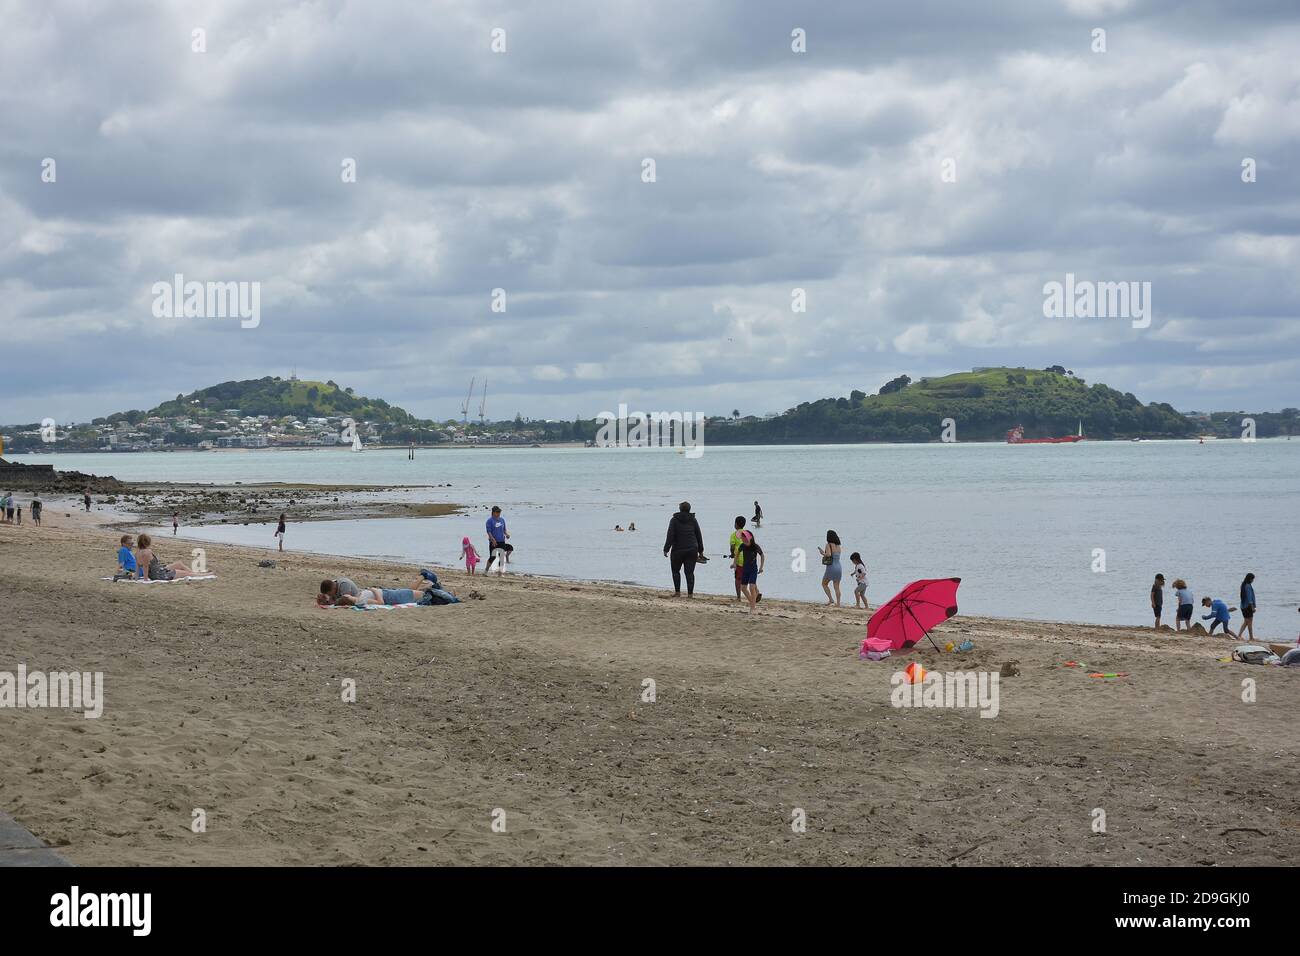 AUCKLAND, NEW ZEALAND - Nov 01, 2020: View of people on Mission Bay Beach Stock Photo